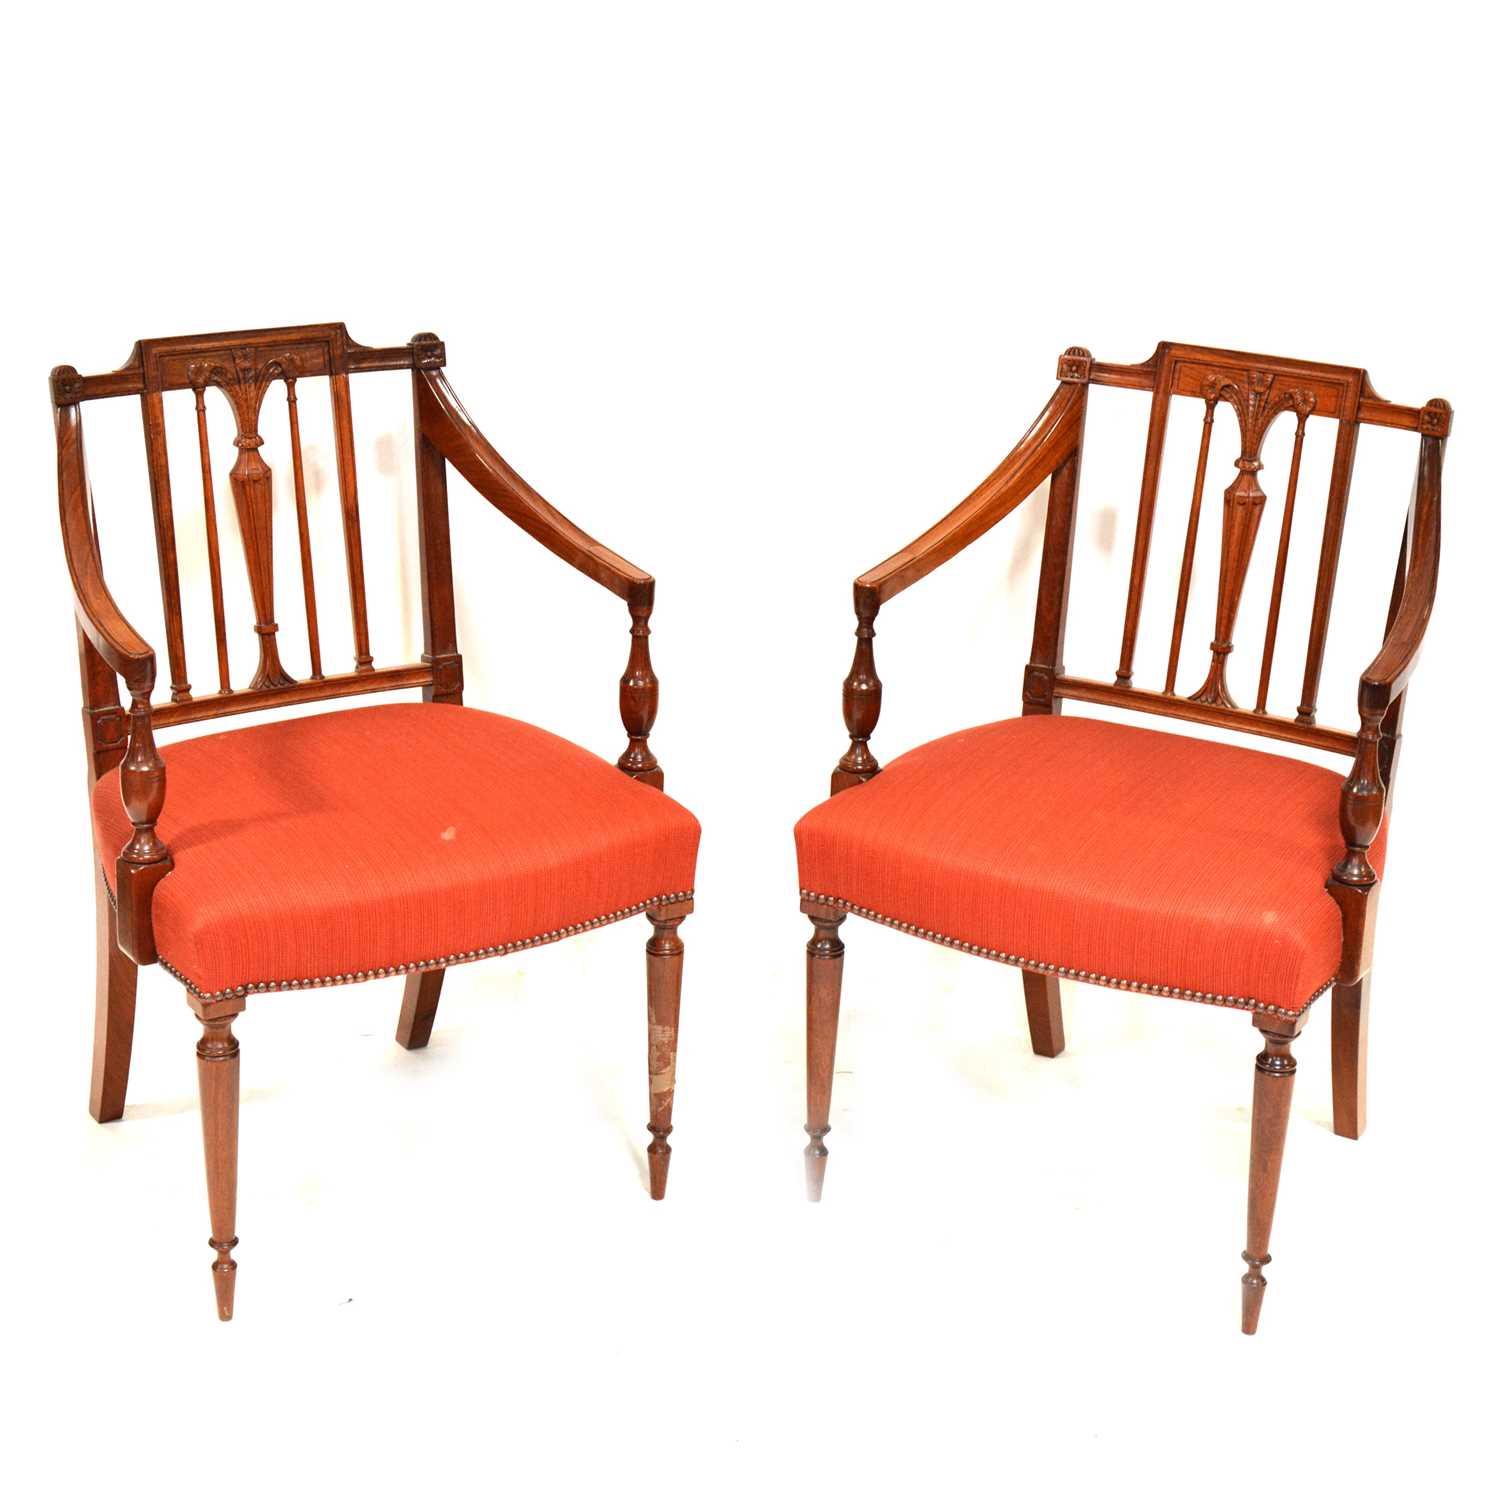 Set of sixteen Anglo-Indian Sheraton style mahogany dining chairs, 19th Century,